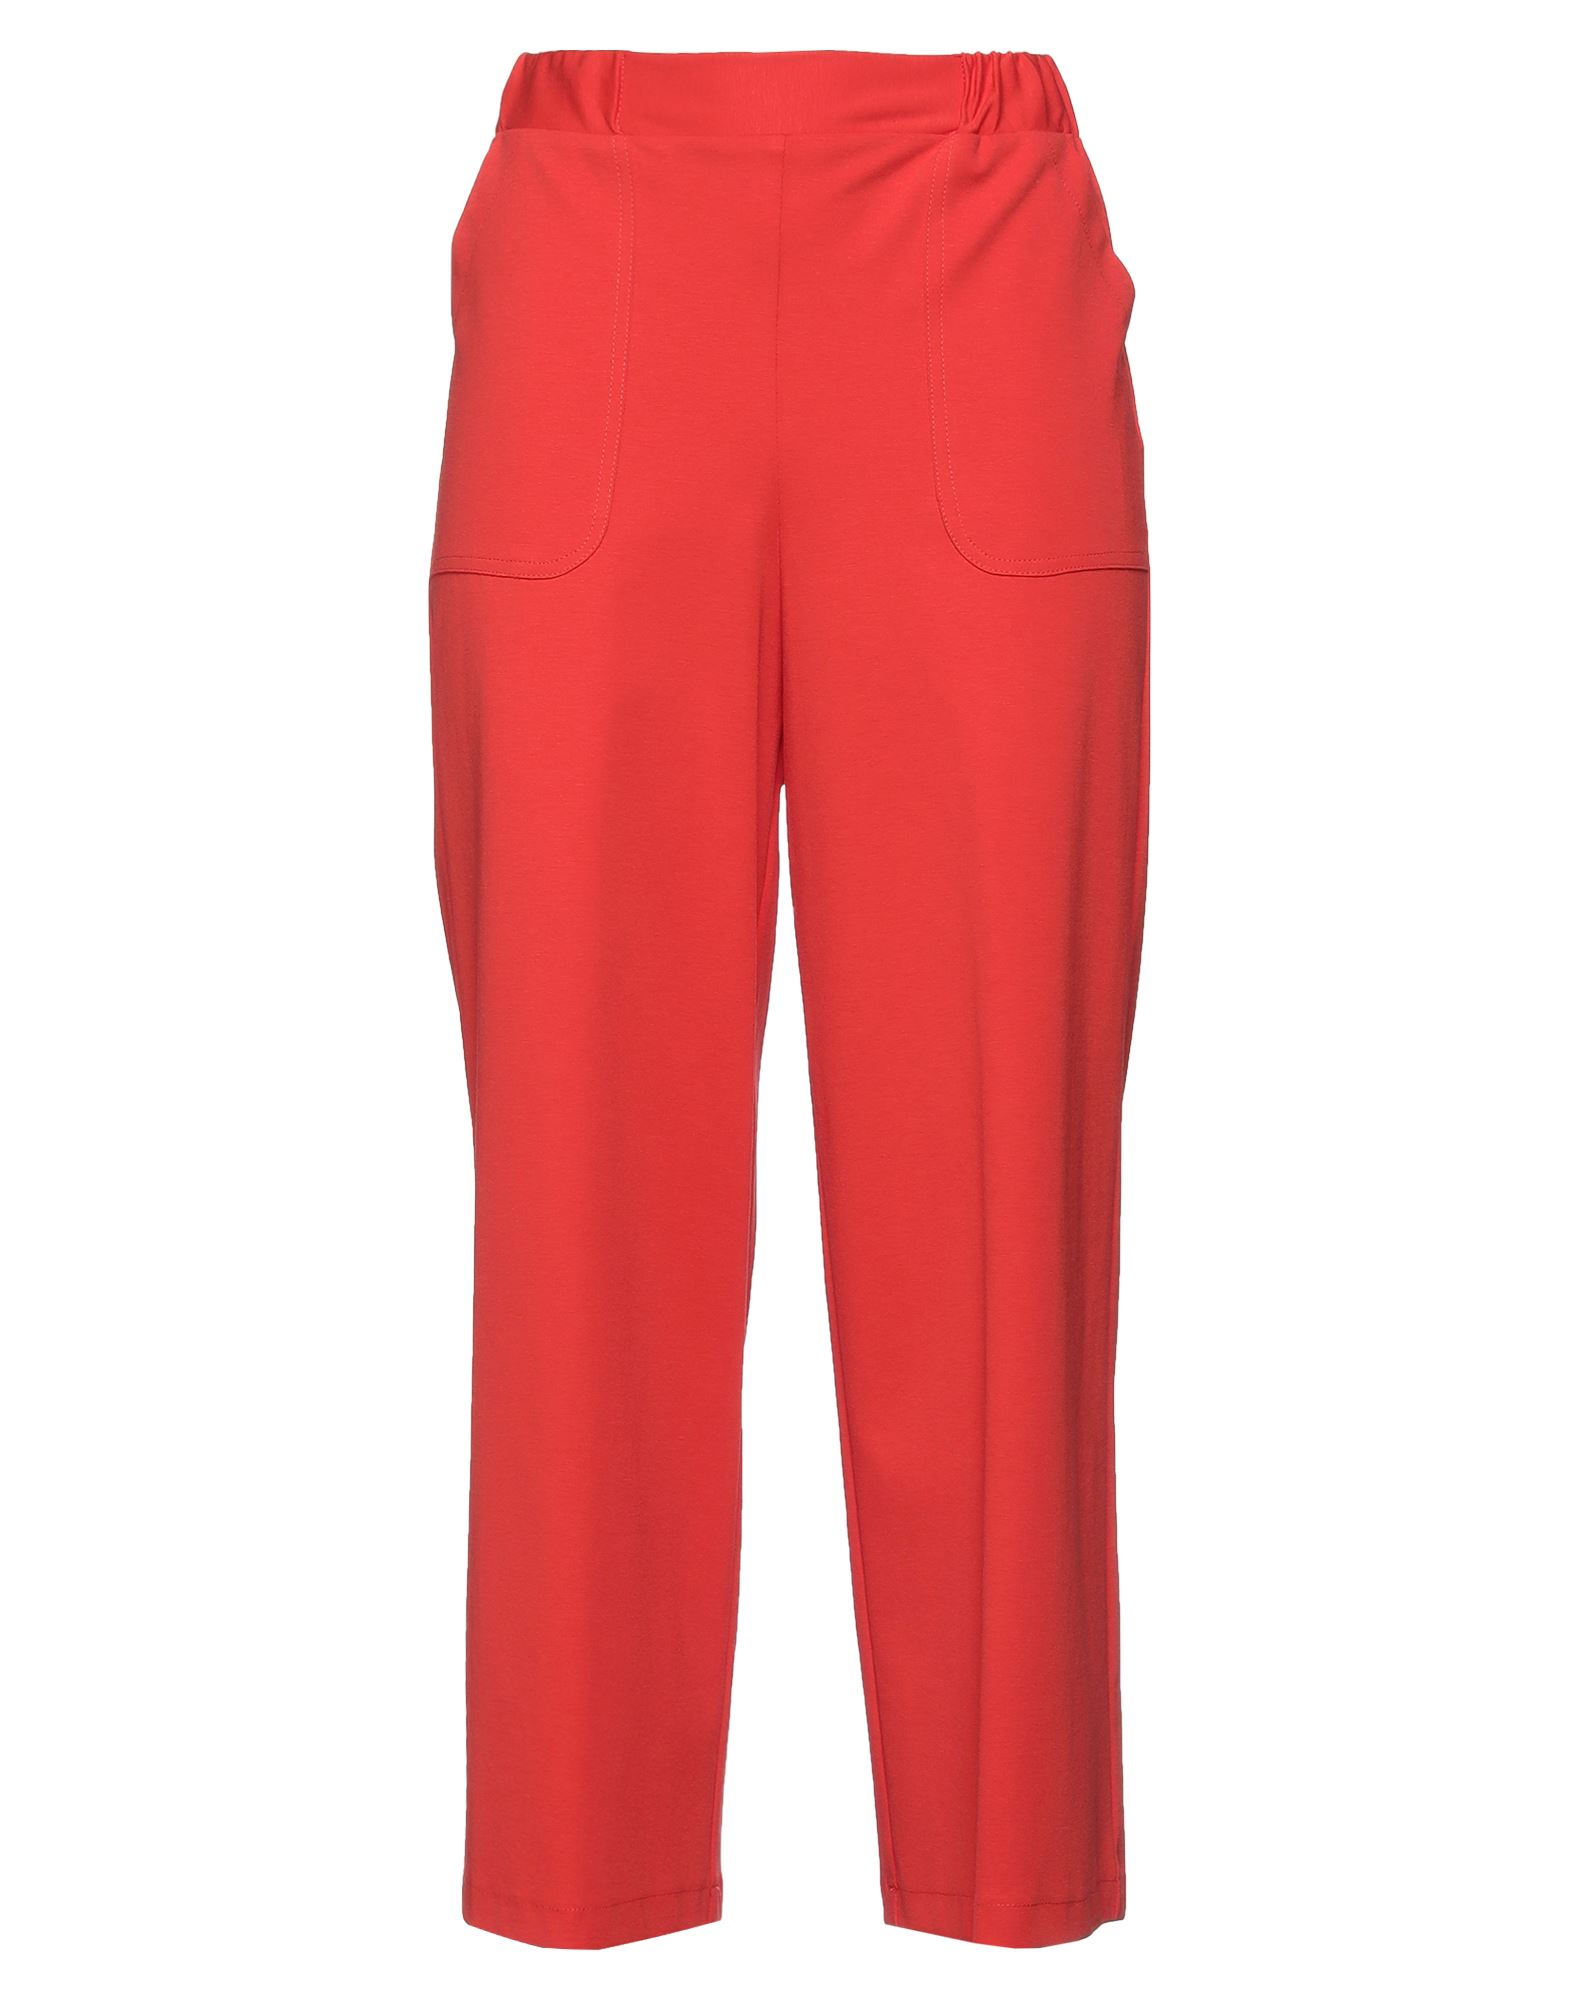 Shirtaporter Pants In Red